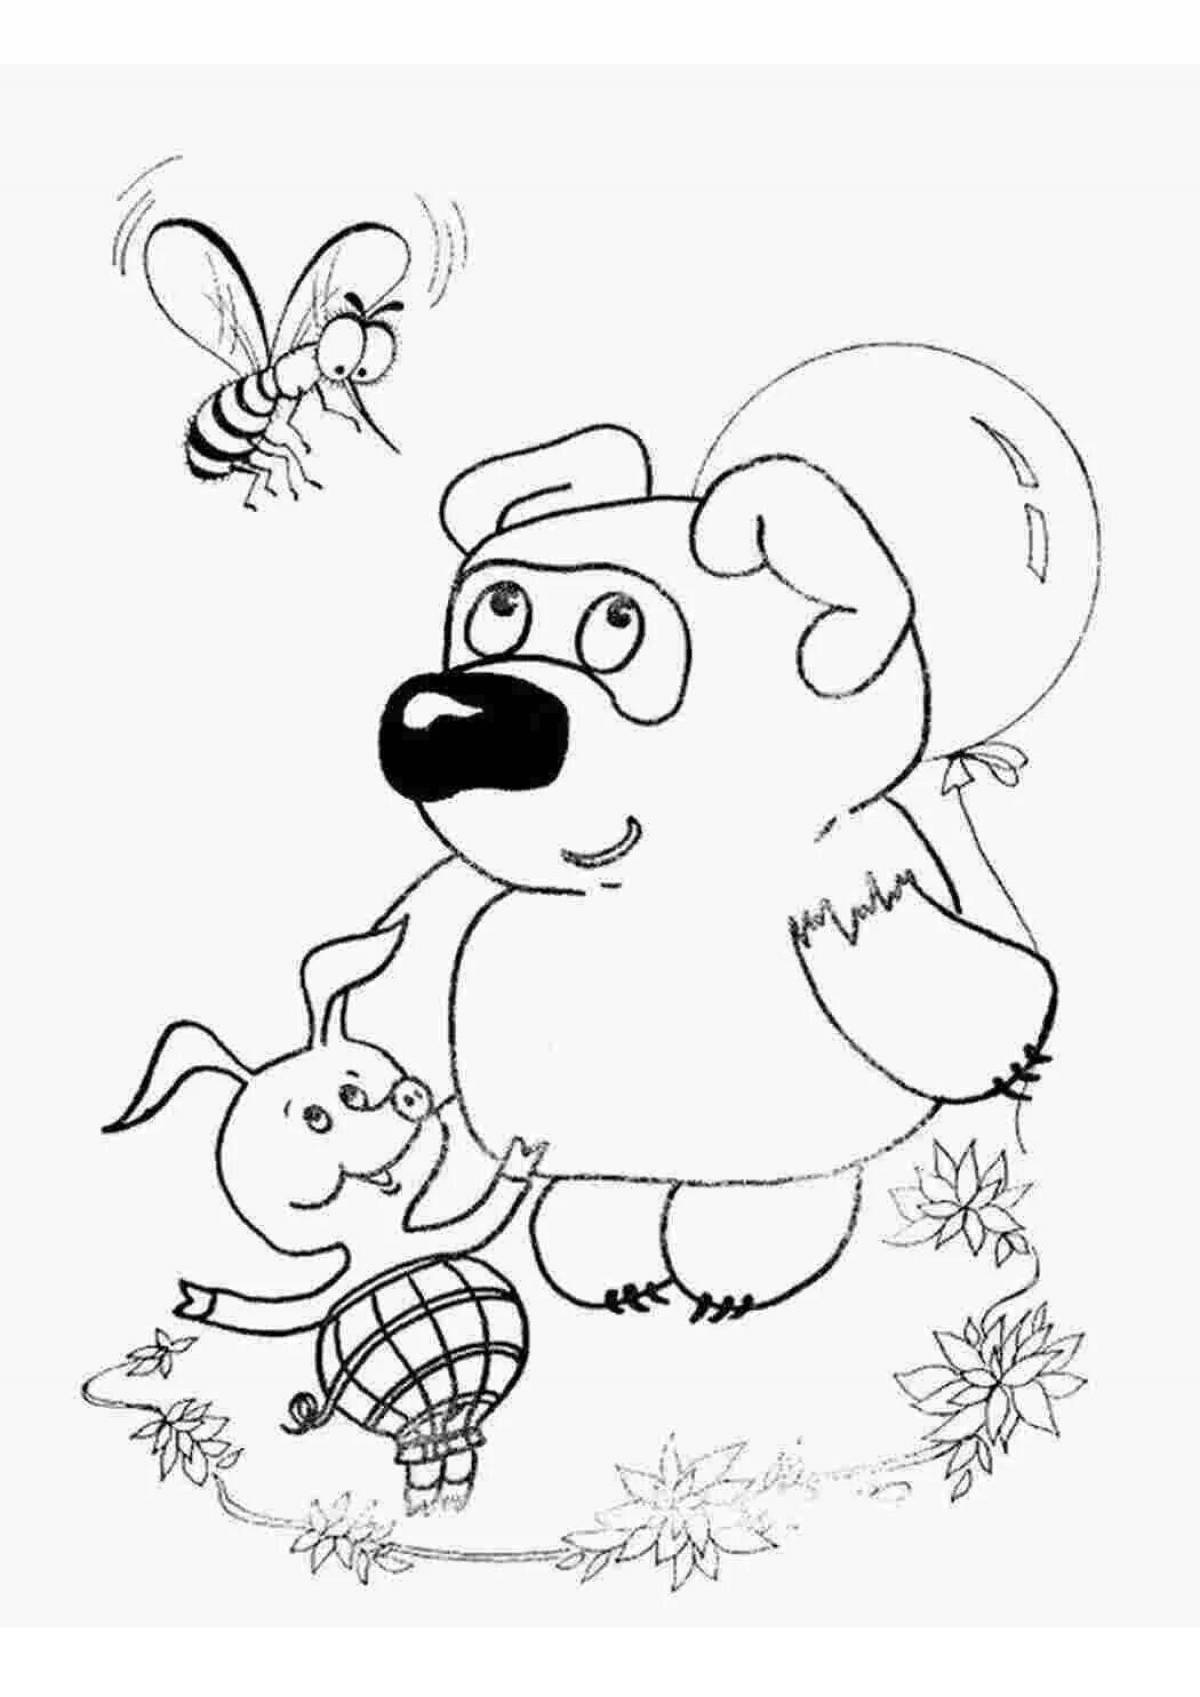 Winnie the Pooh coloring book for kids